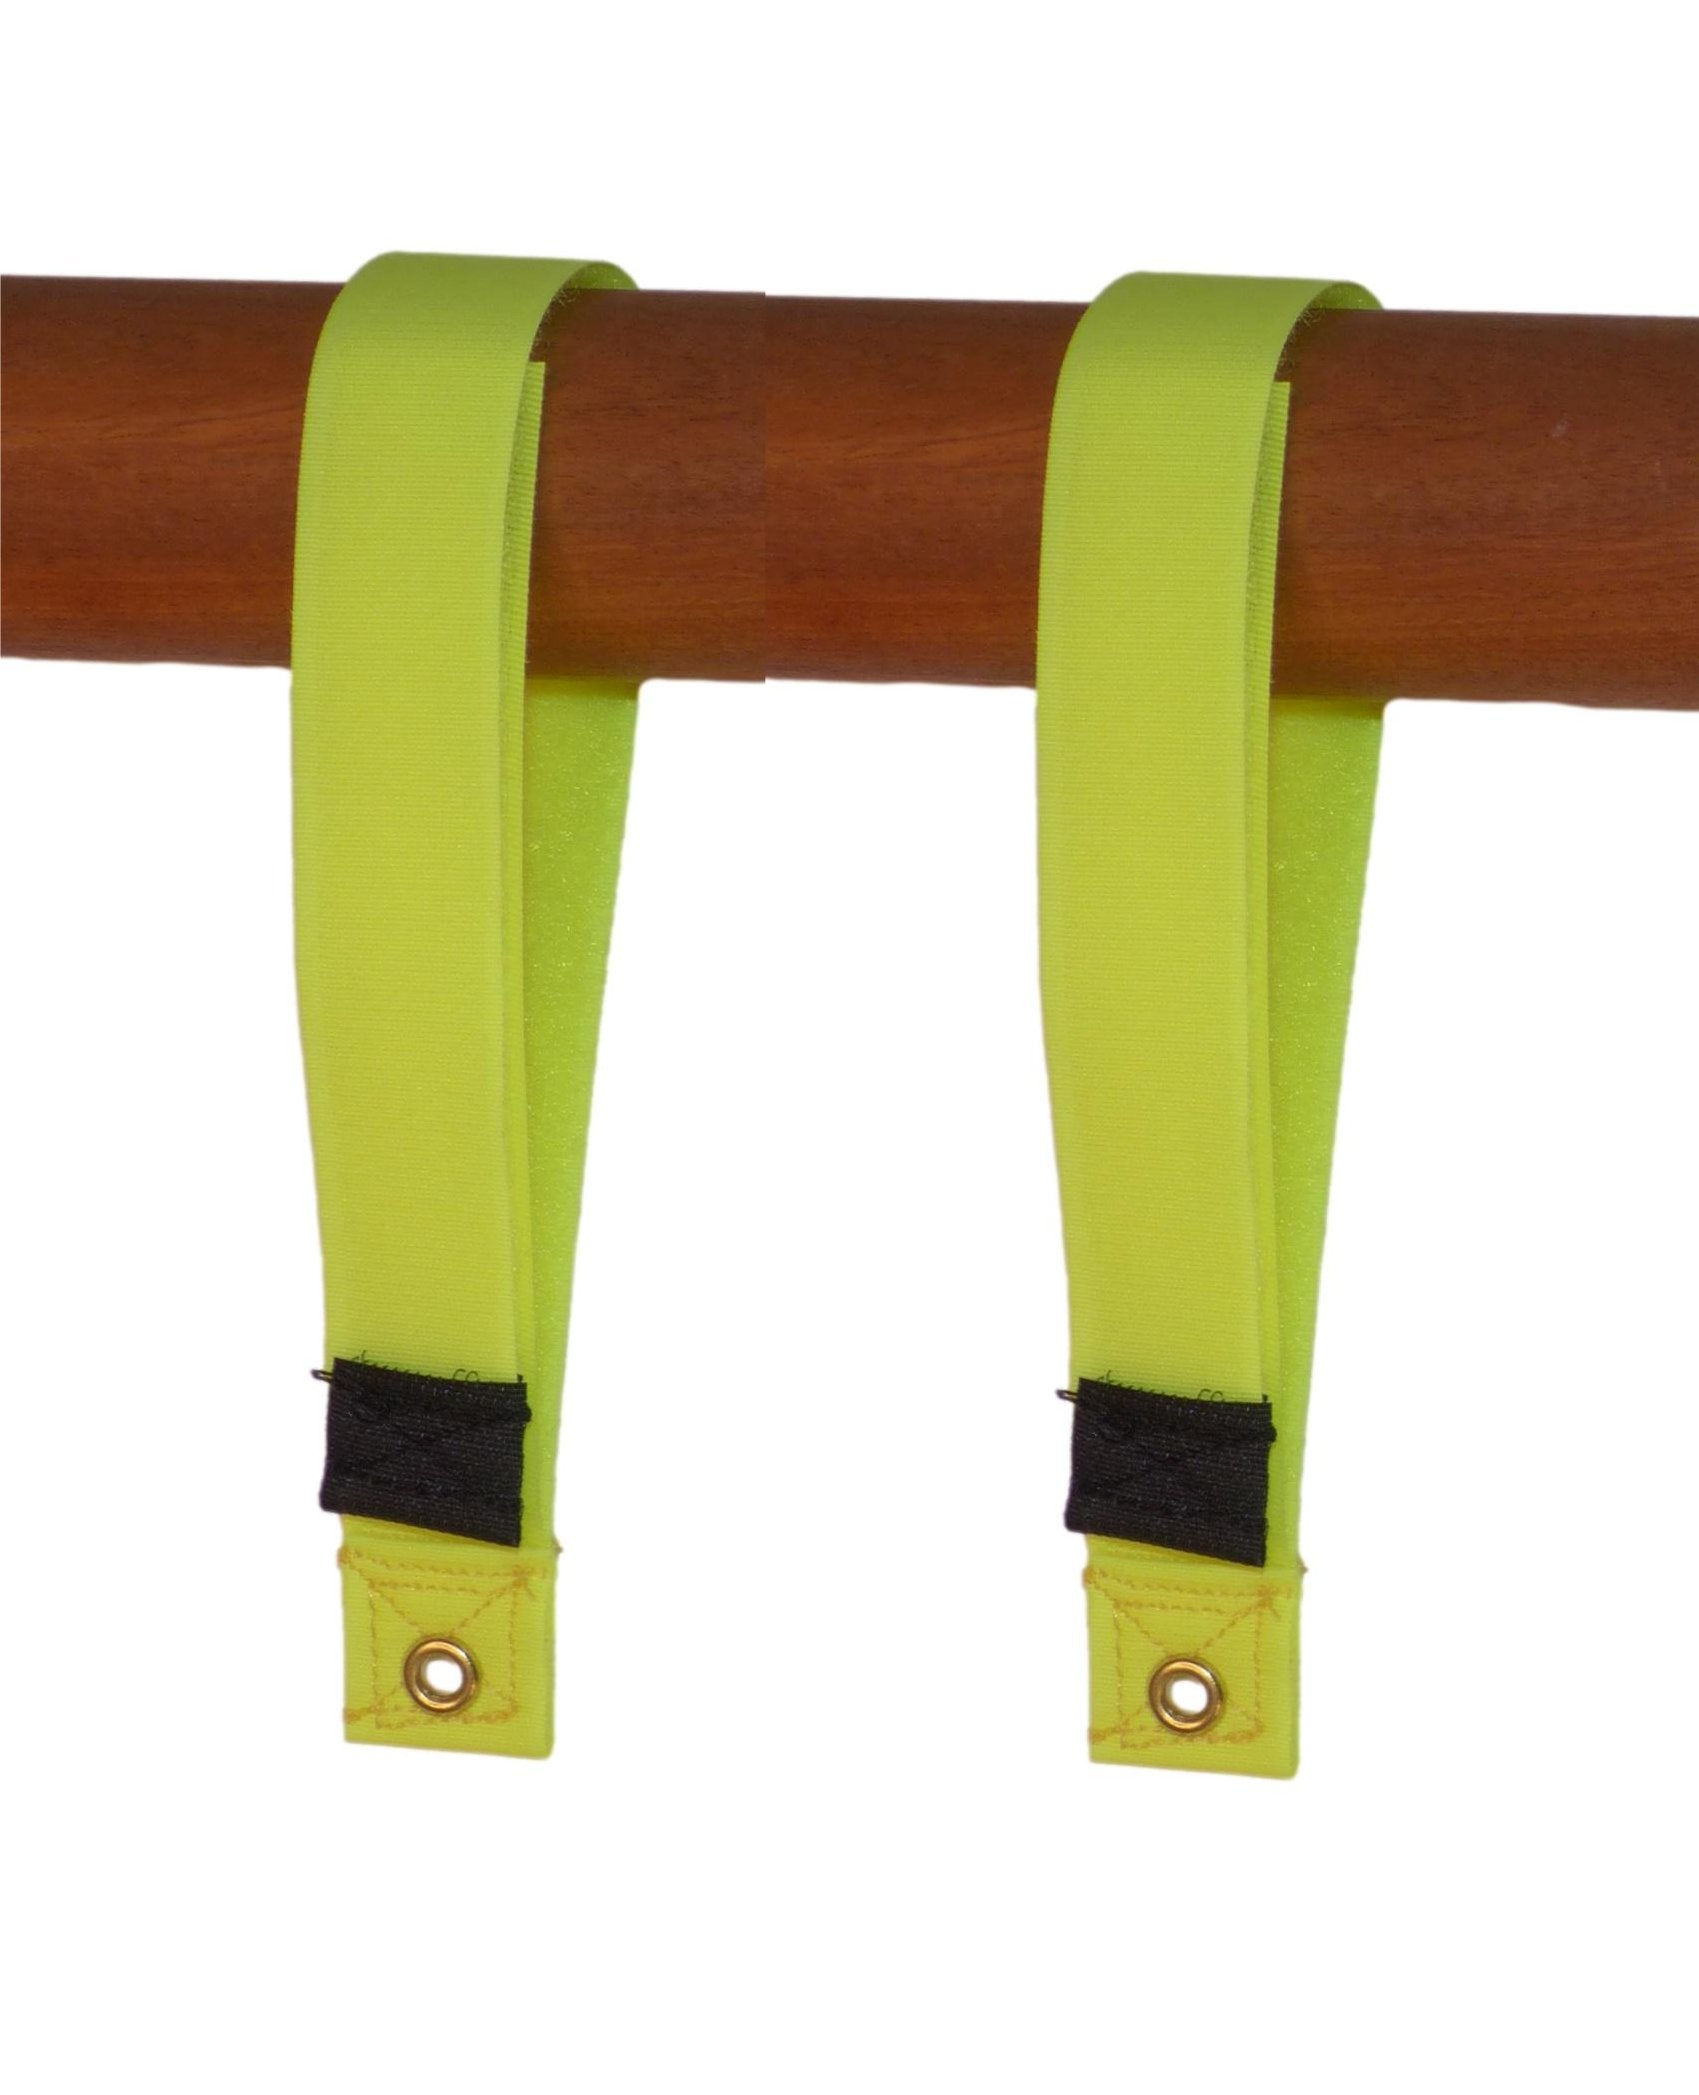 25mm Hook Loop Tidy & Hang Strap with Eyelet (Pack of Two) in yellow